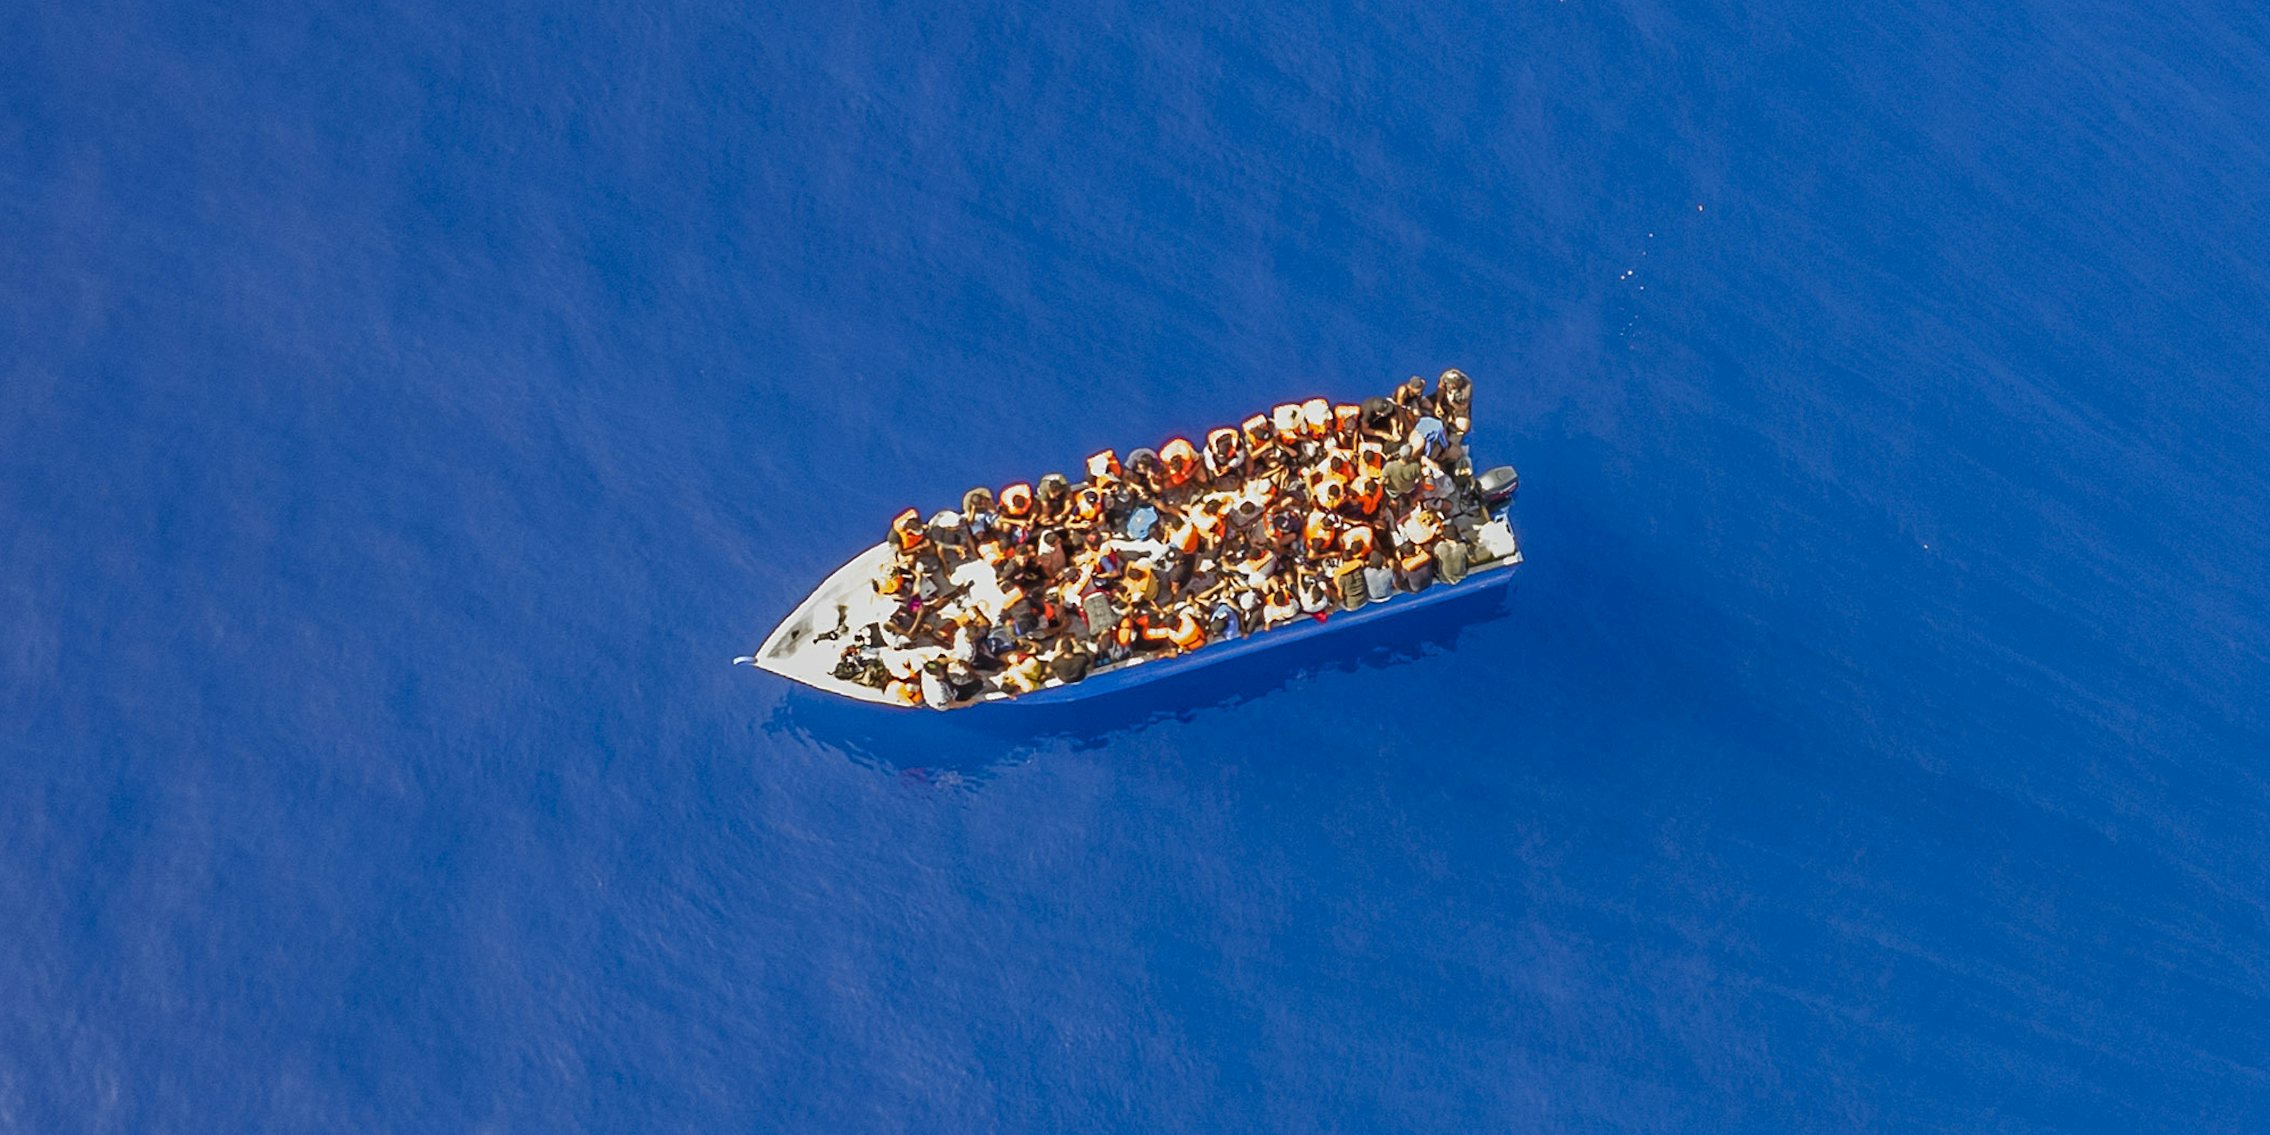 A small wooden boat filled with people